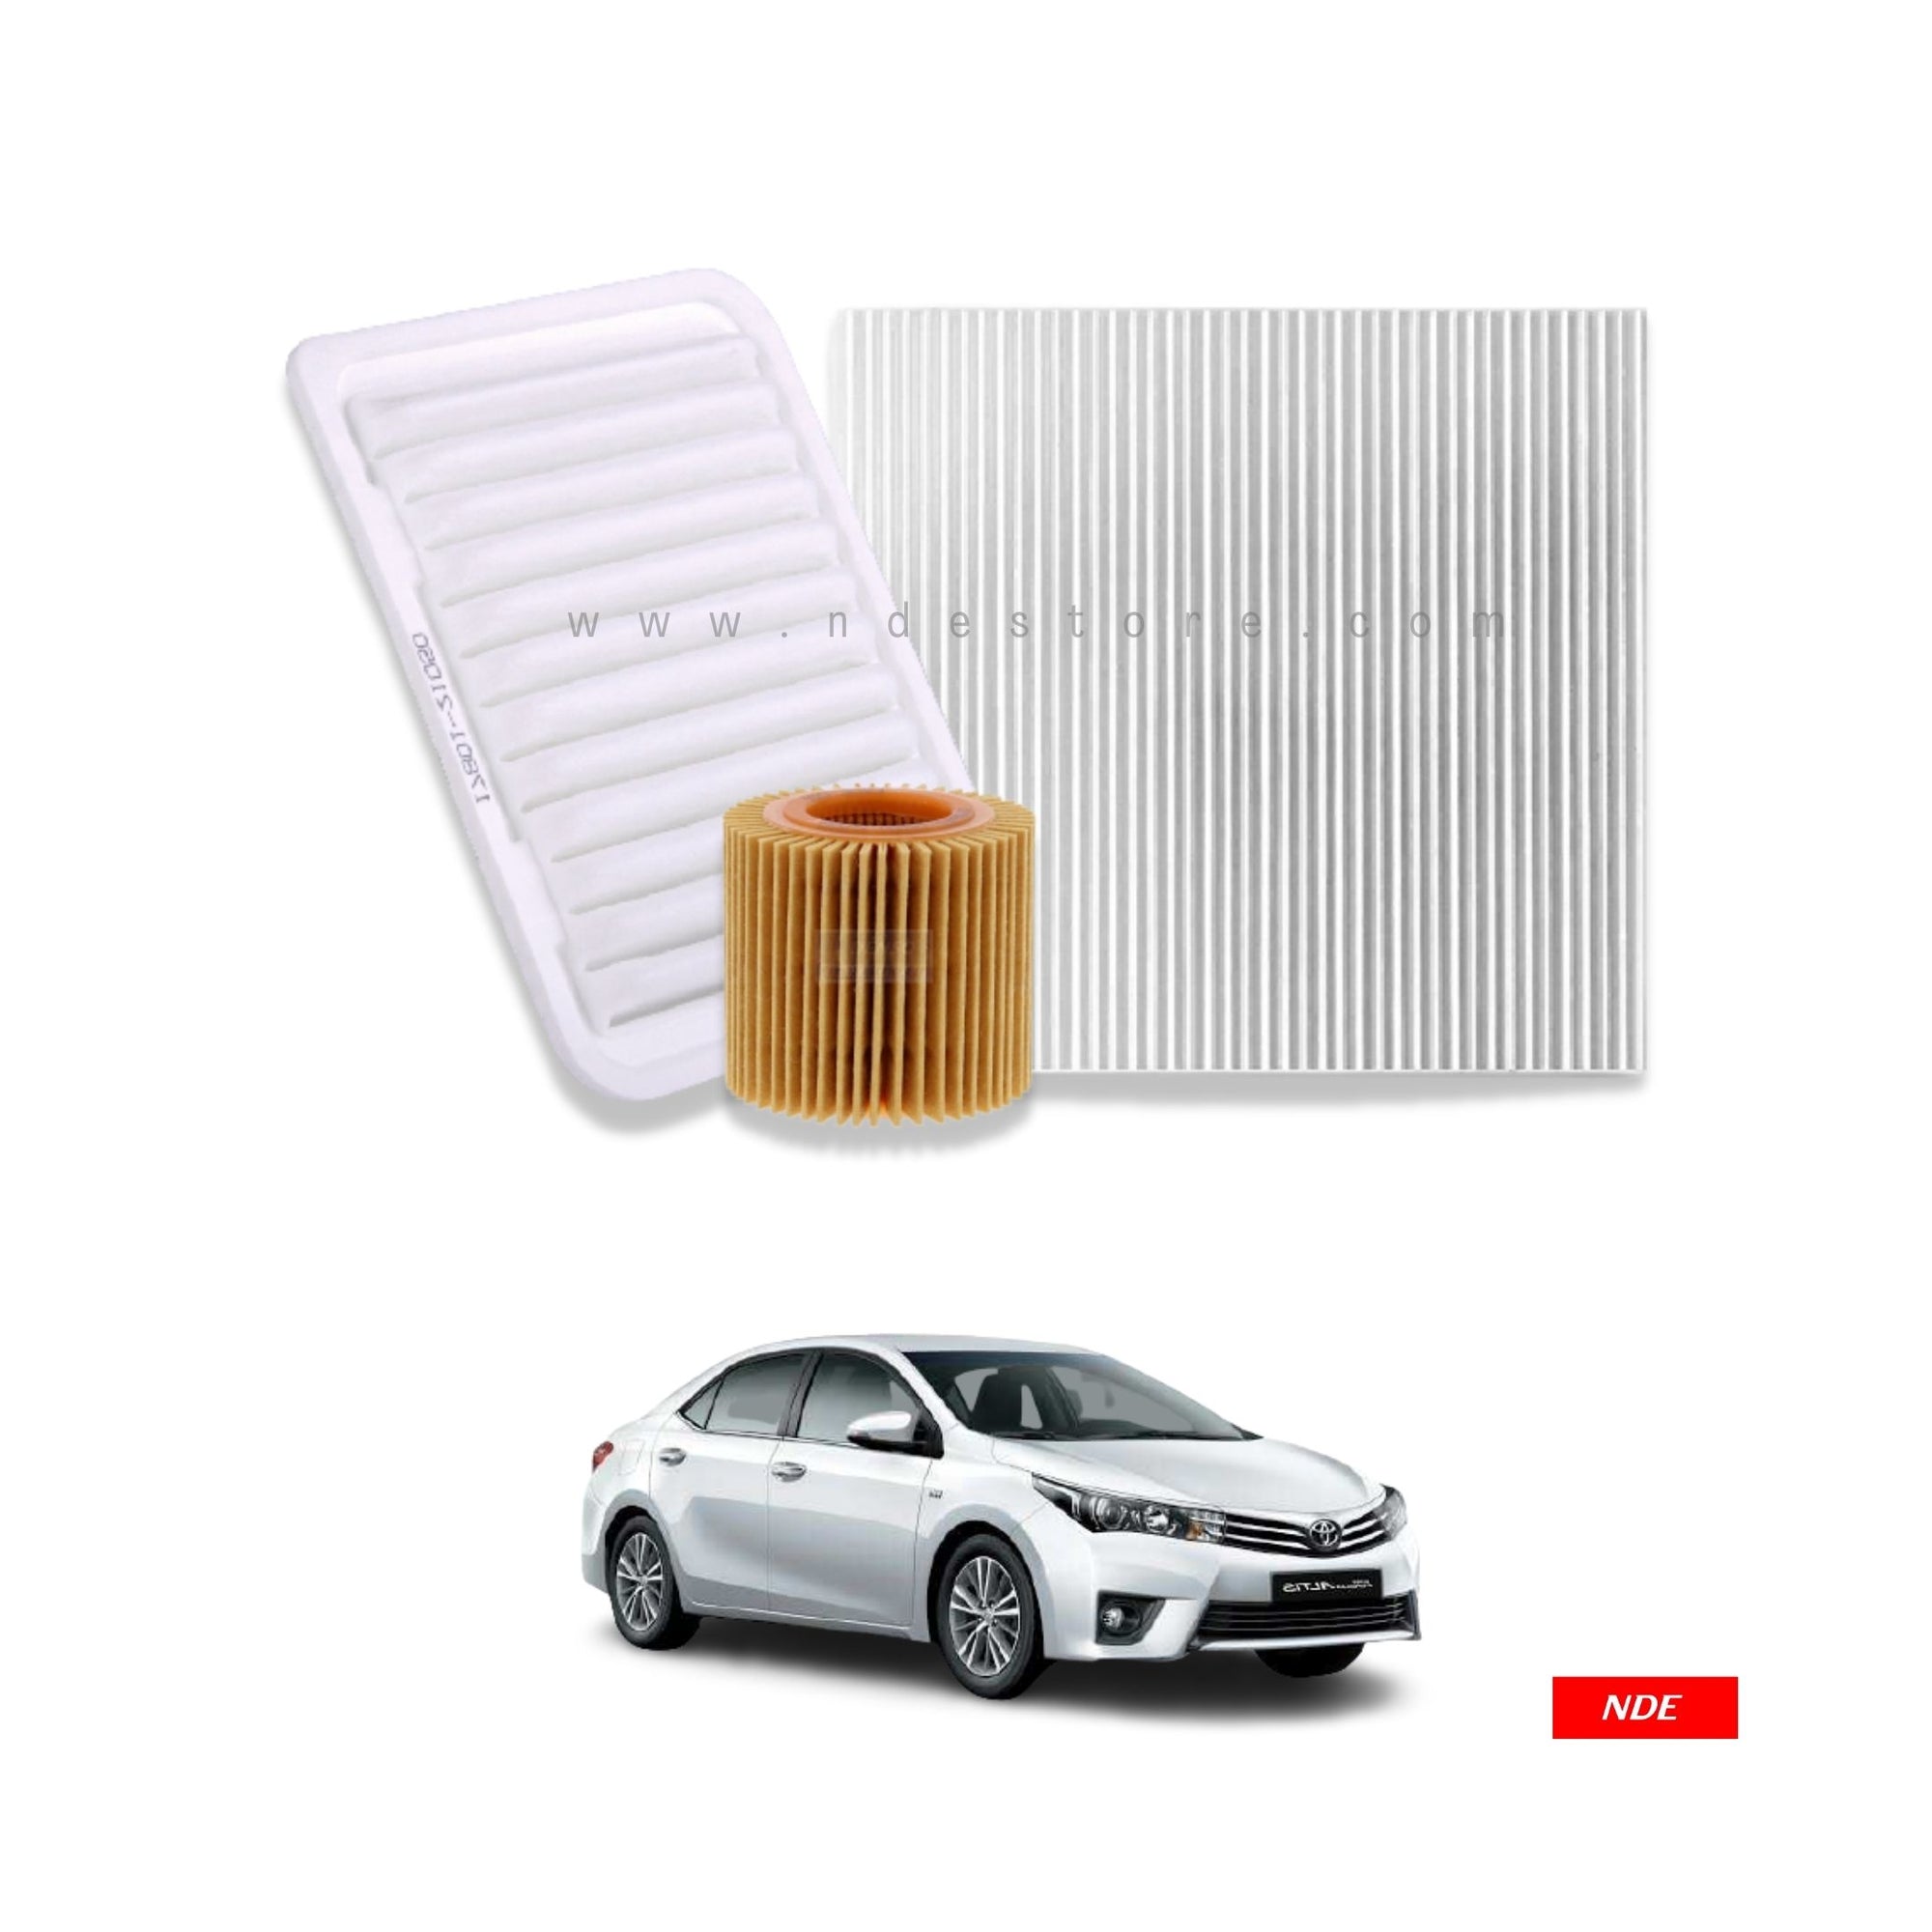 ESSENTIAL FILTER PACK DENSO FOR TOYOTA ALTIS 1.8 (2008-2024)